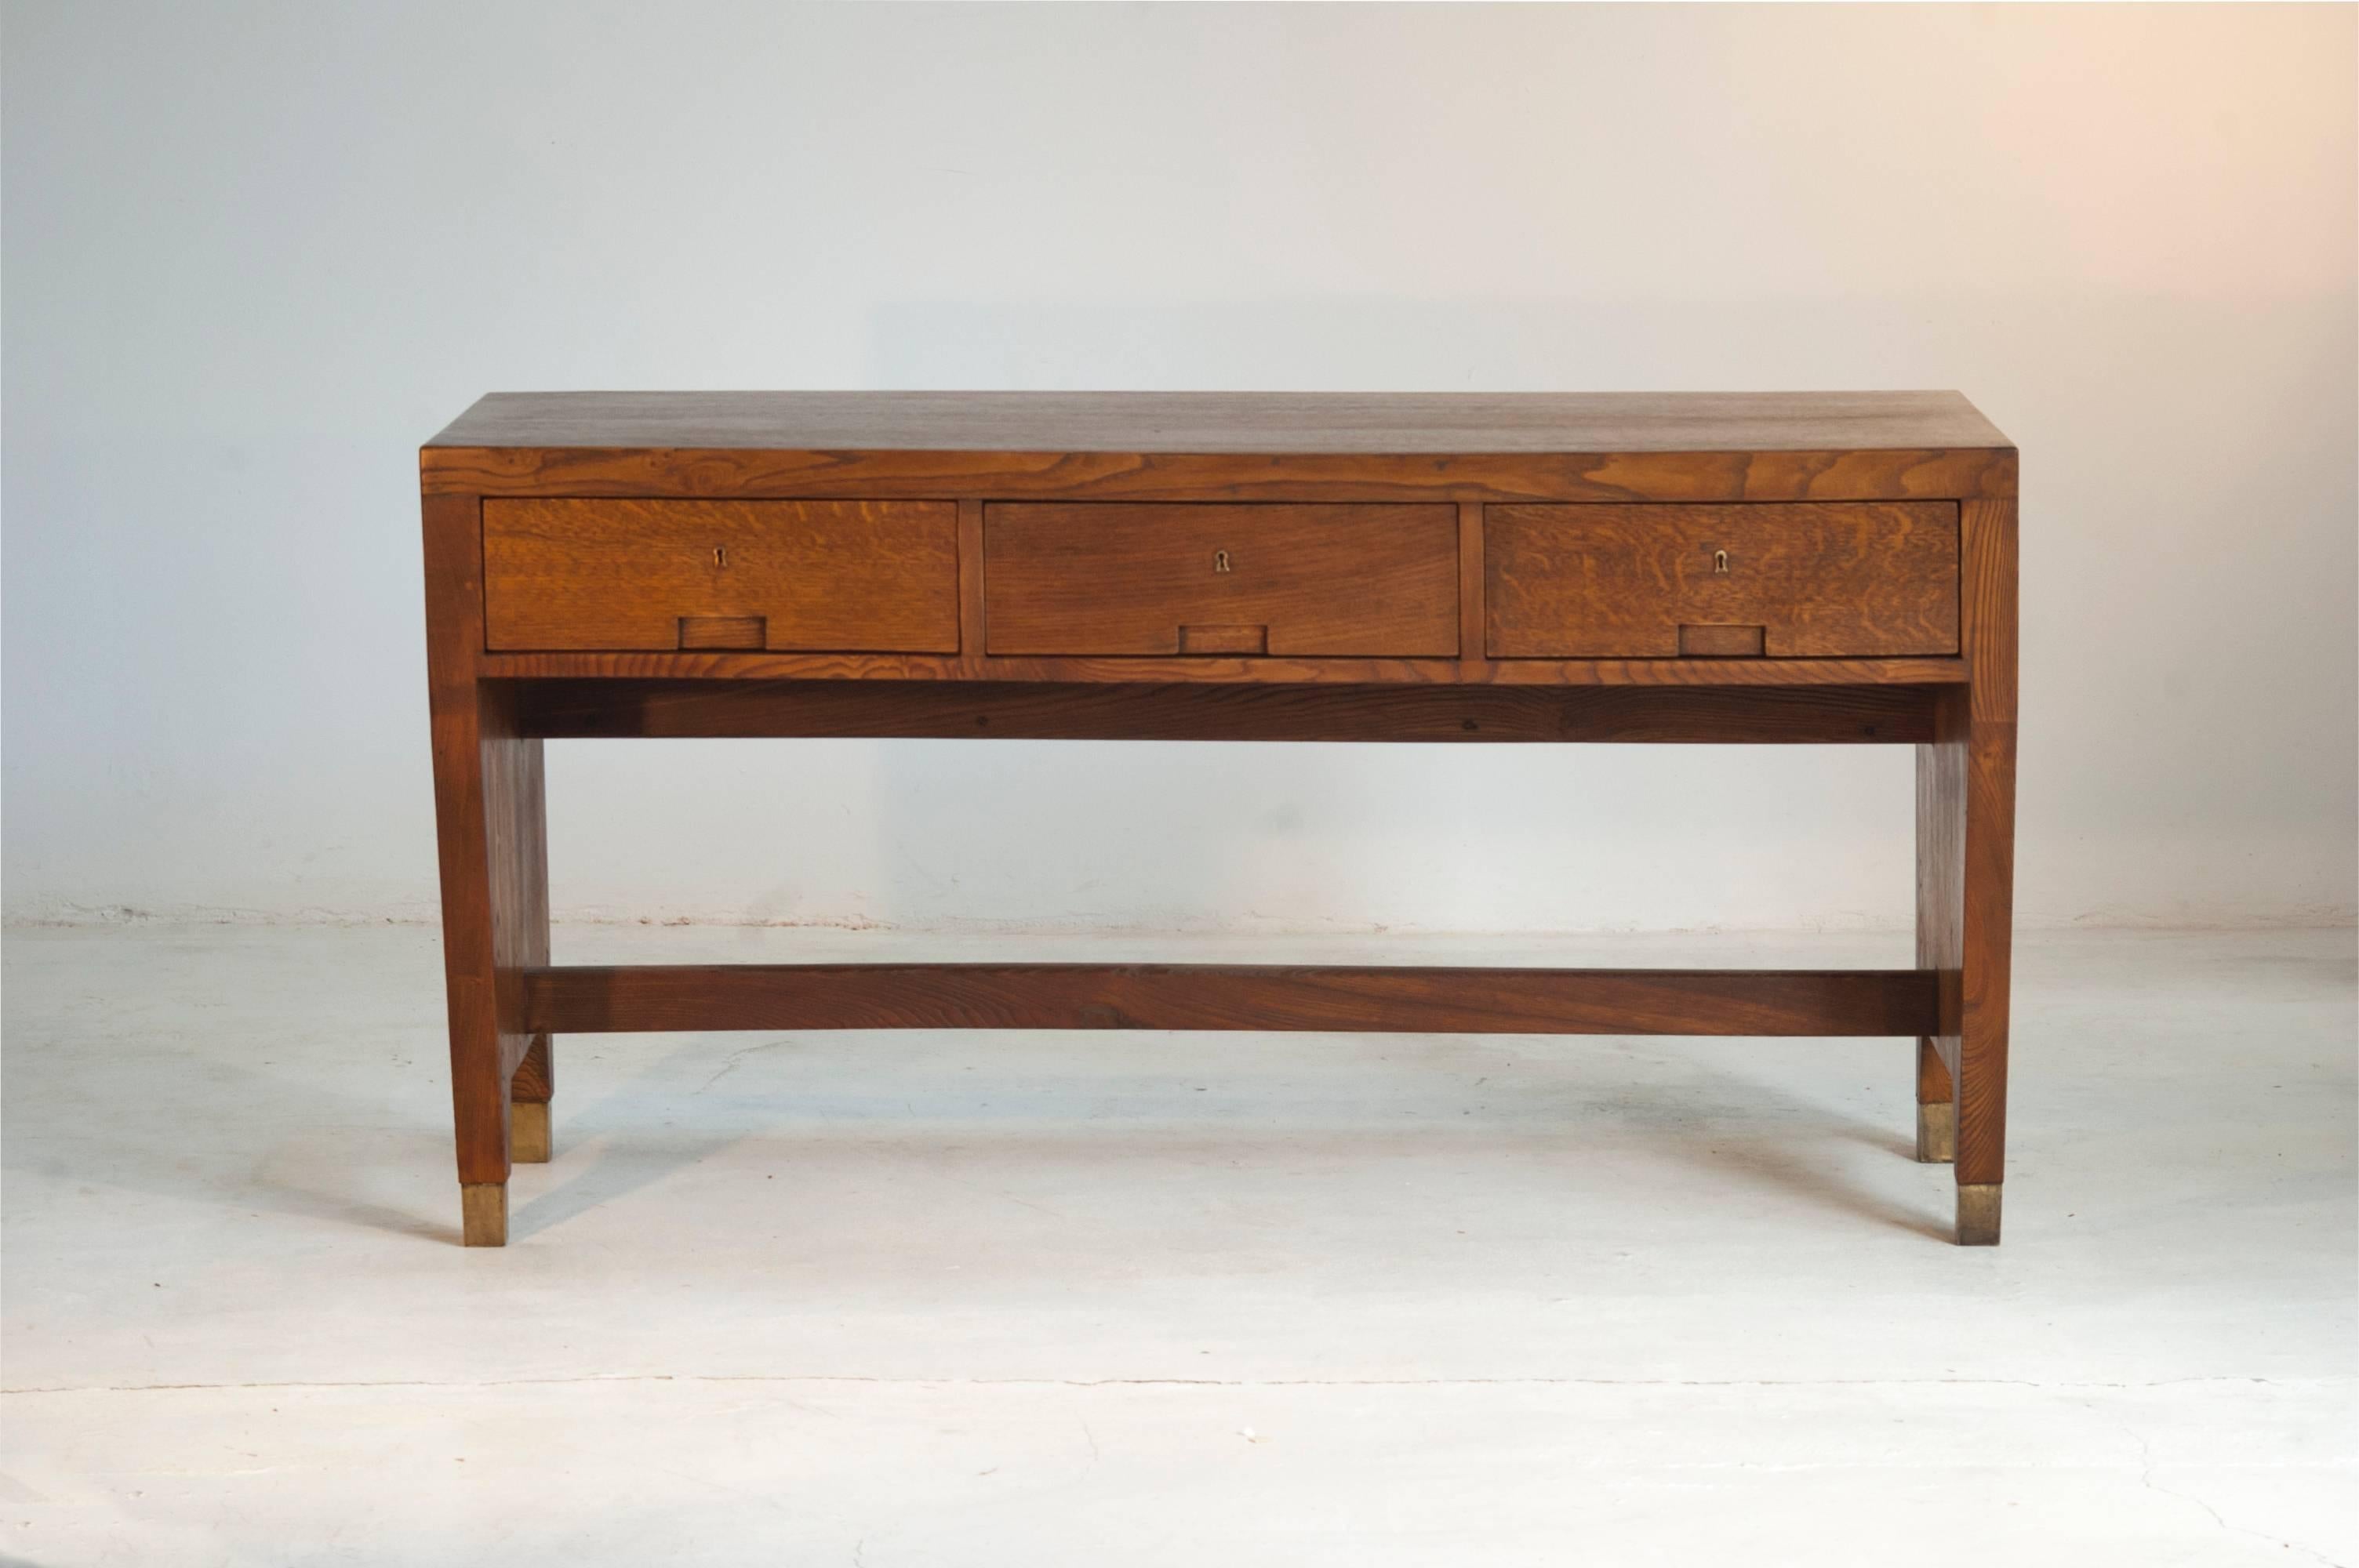 Gio Ponti (1891-1979).

Important desk Made for the University of Mantova  manufactured by Schirolli in Italy, 1950.

Walnut mid-century modern writing desk 

Measurements:
160 cm x 83 cm x 68 H cm.
63 in x 32.67 in x 26.77 H